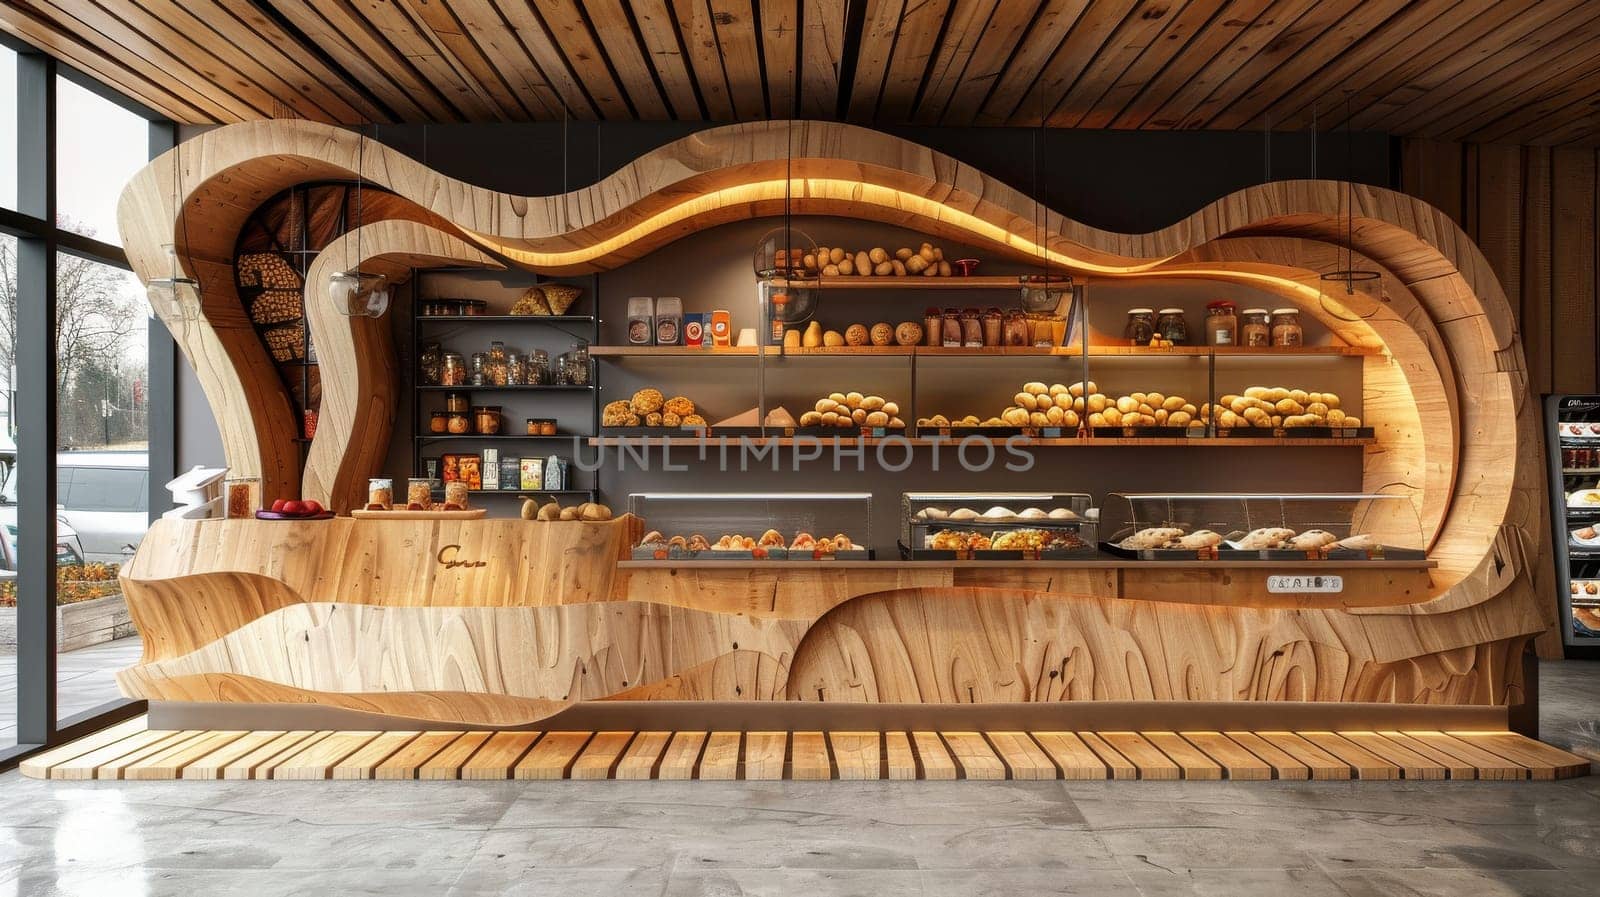 A bakery with a wooden interior and a curved counter. The counter is filled with pastries and bread